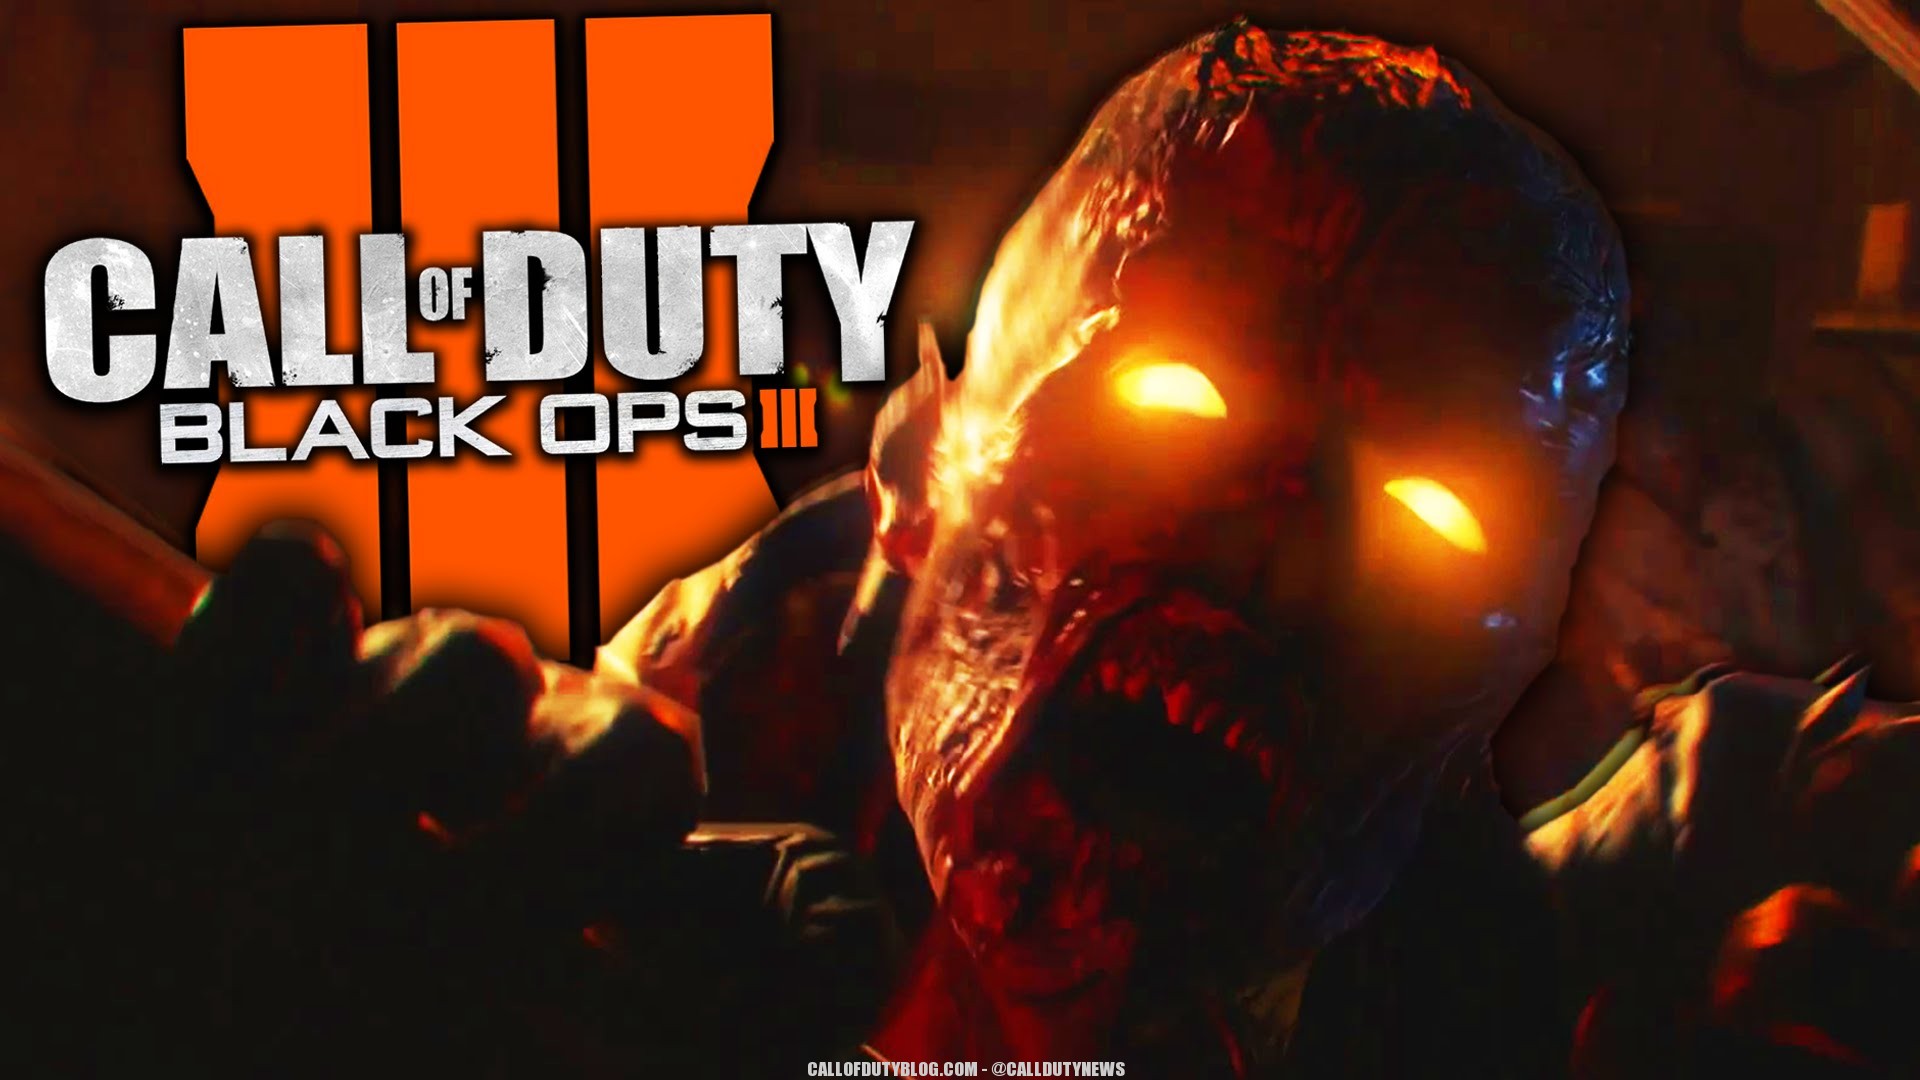 Black Ops 3 Zombies Background